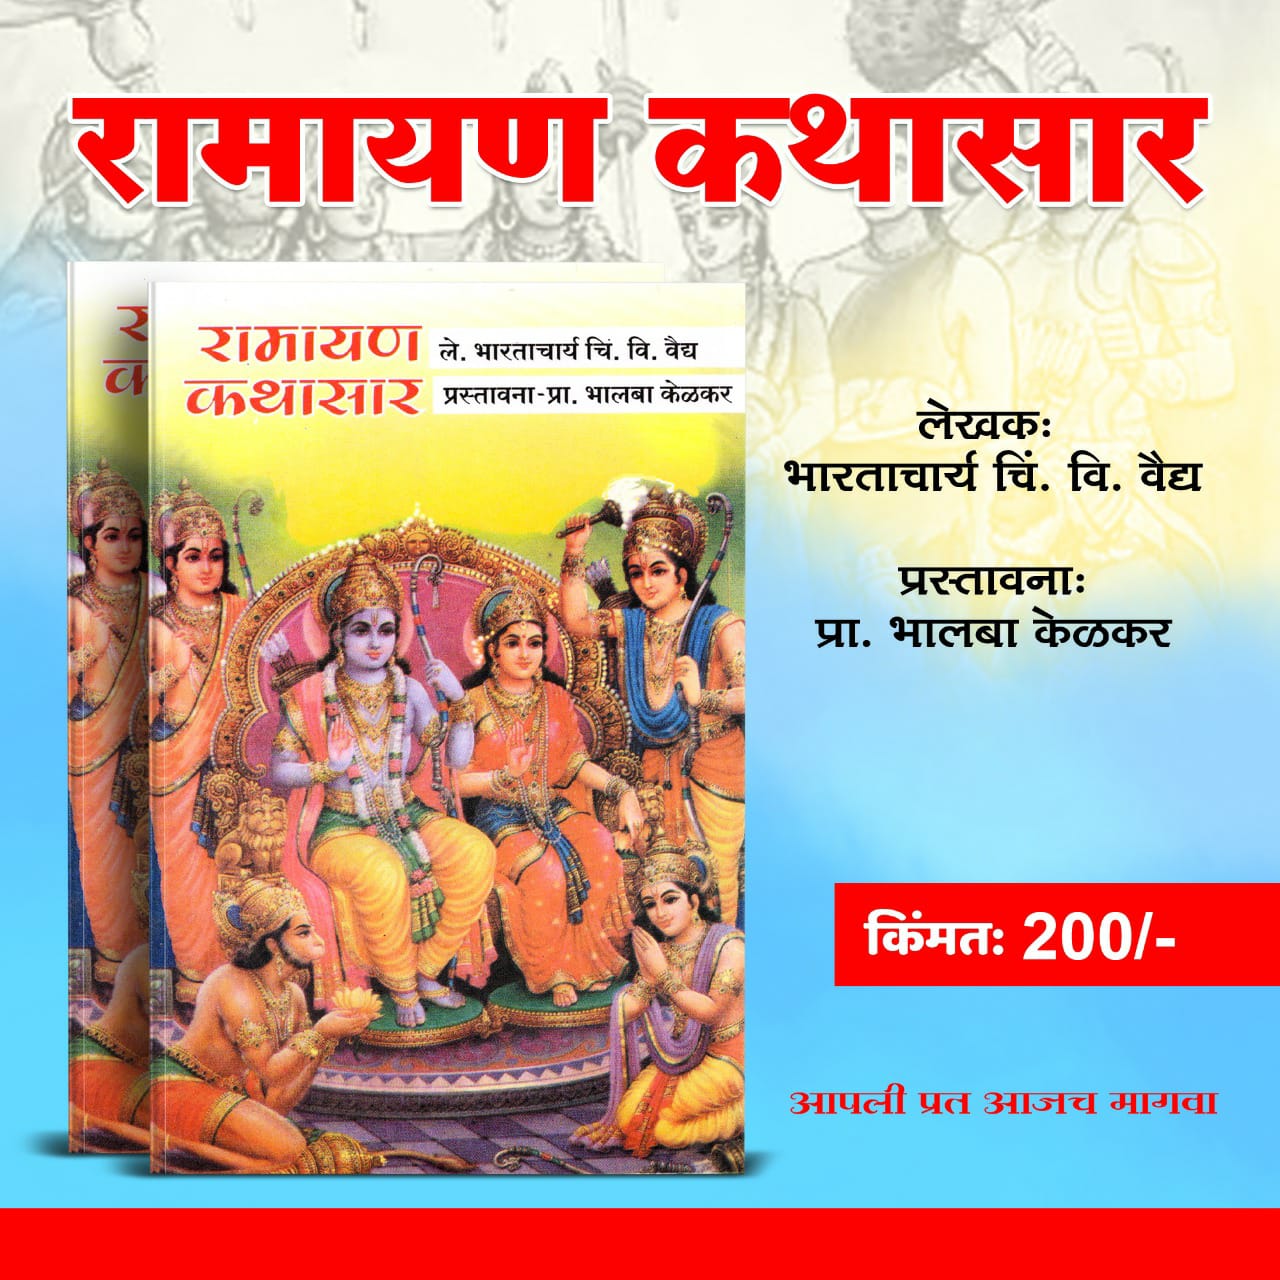 Picture of Ramayan Kathasagar: A Beautiful Book on the Epic Tale - Written by Bharatacharya Vaidya and Conceptualized by Prof. Bhalba Kelkar.